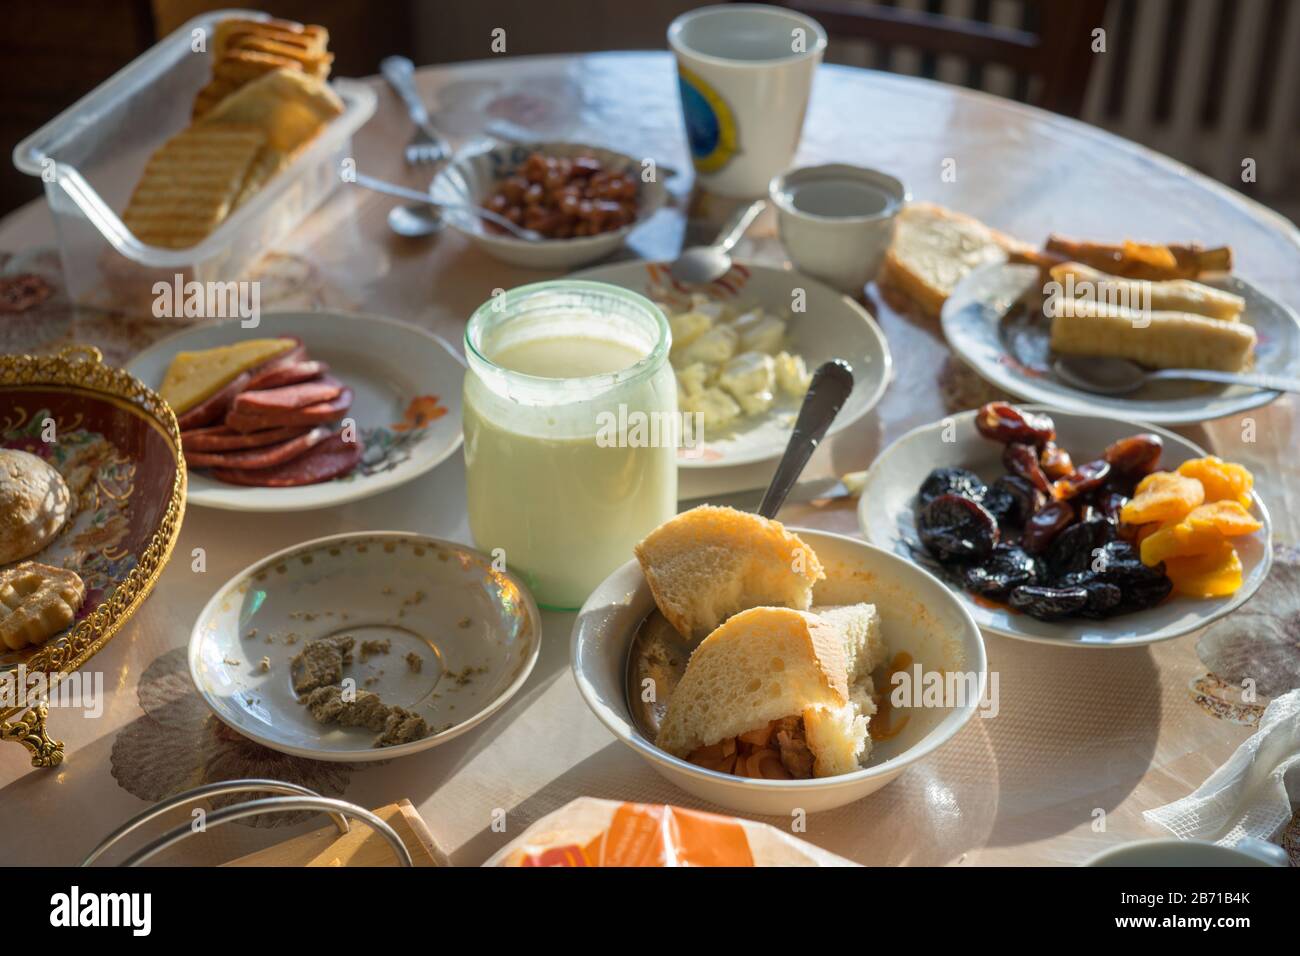 Uncleaned dining table with plates, mugs and food. Stock Photo